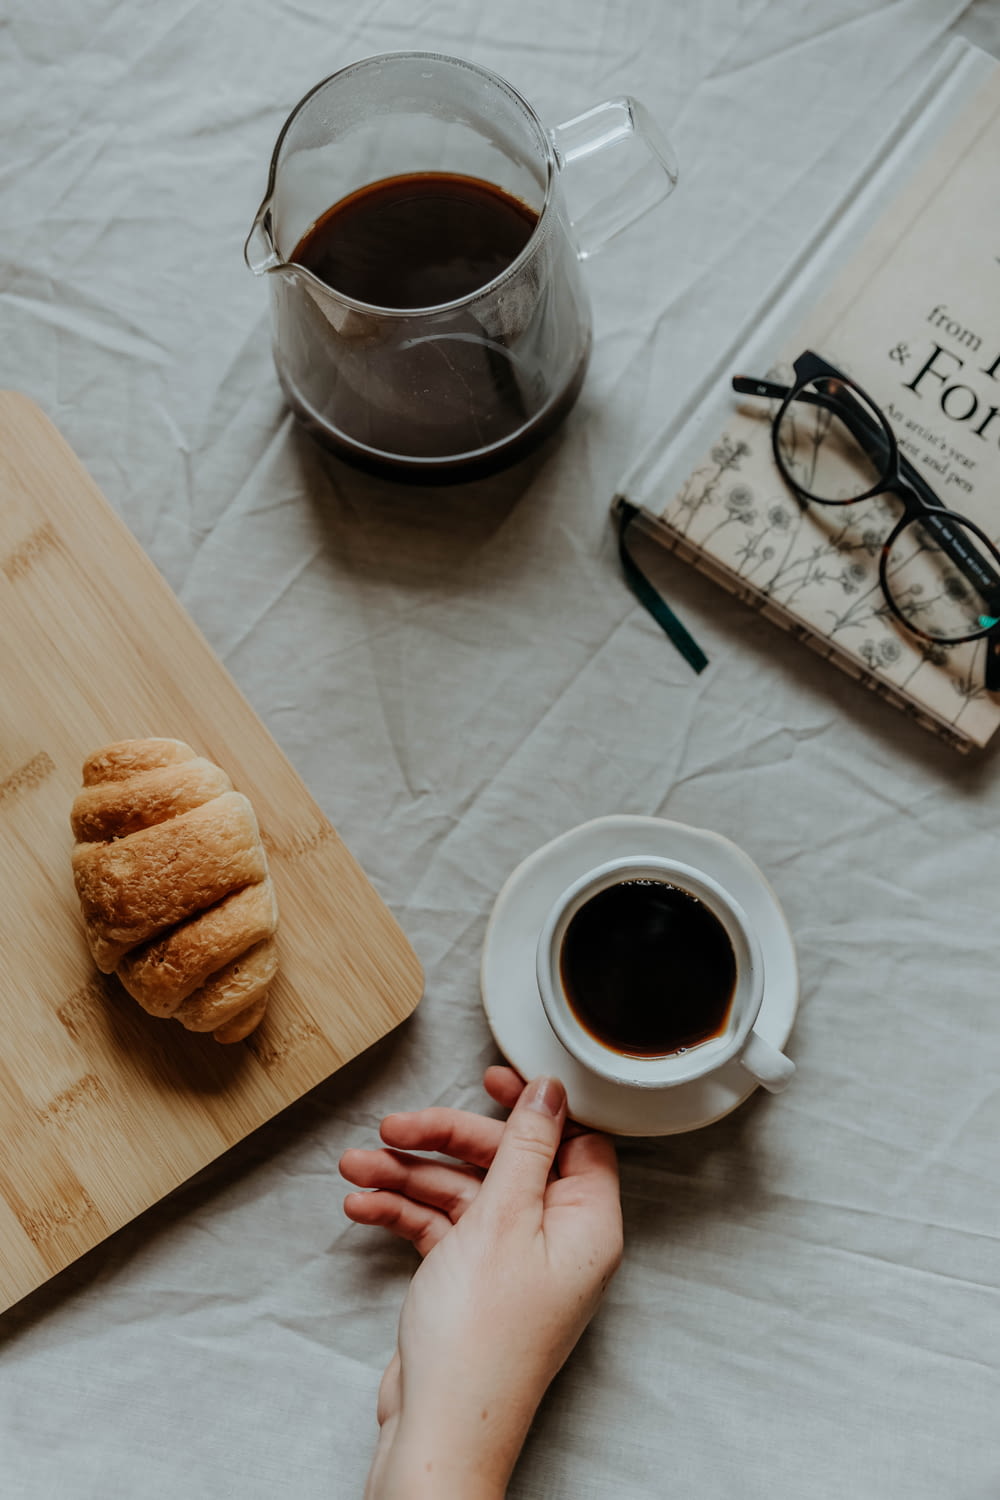 a hand holding a cup of coffee next to a tray of pastries